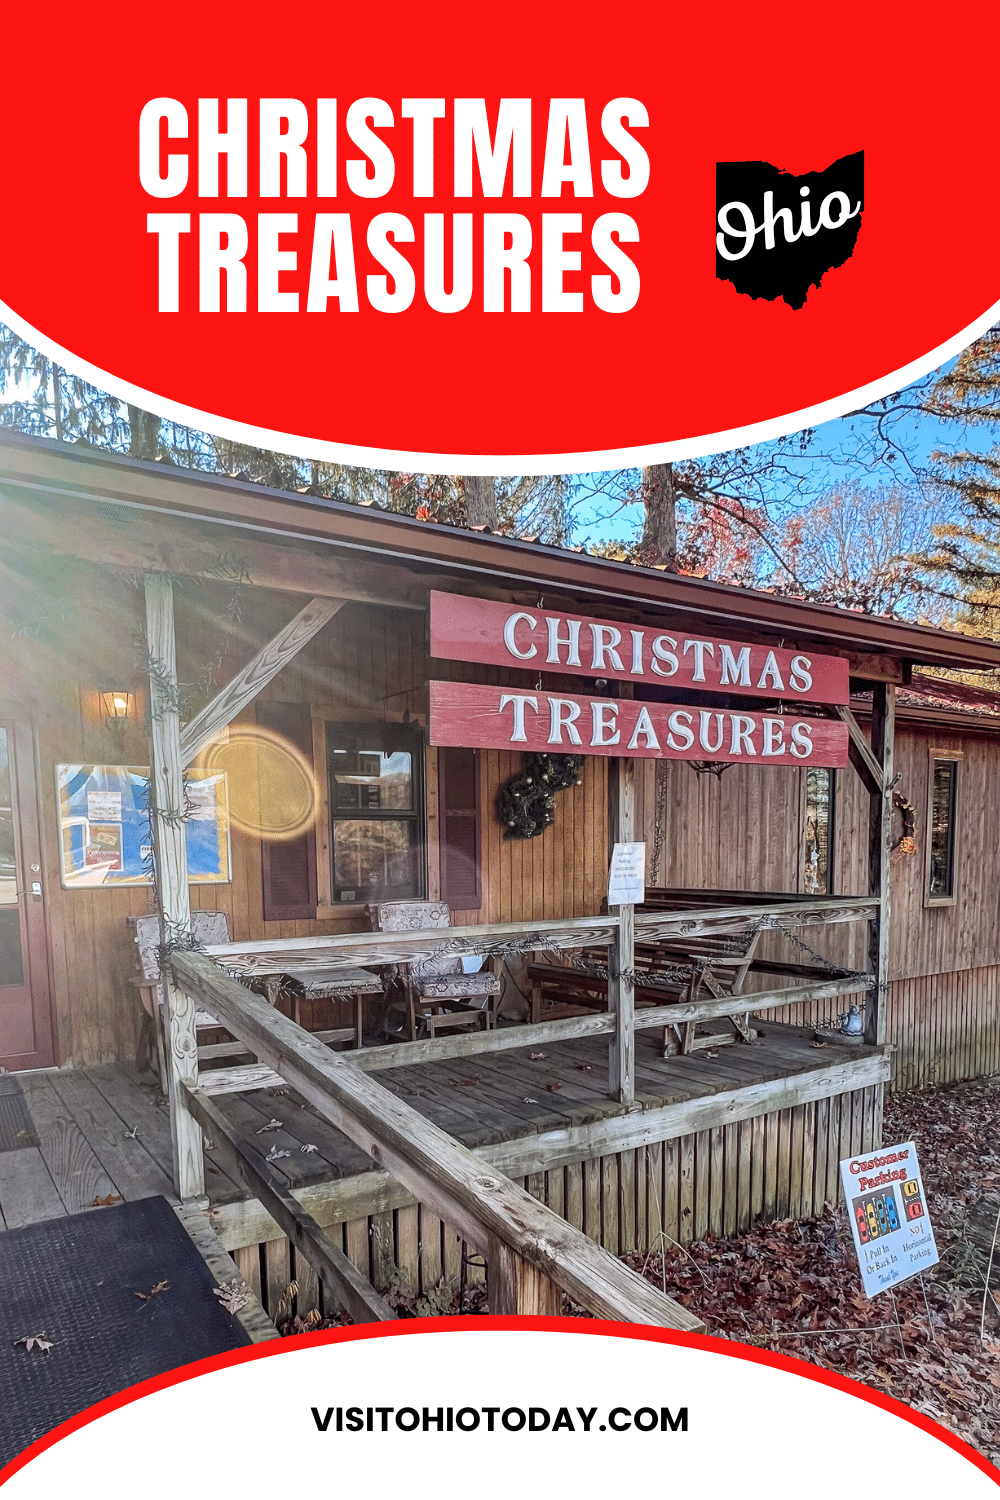 Christmas Treasures is a small shop in Hocking Hills that sells Christmas decorations and other year-round gifts. Together with Hocking Hills Candle Works and Wind Chime Shop, these three gems are all owned by the same people and are delightful to visit any time of year.